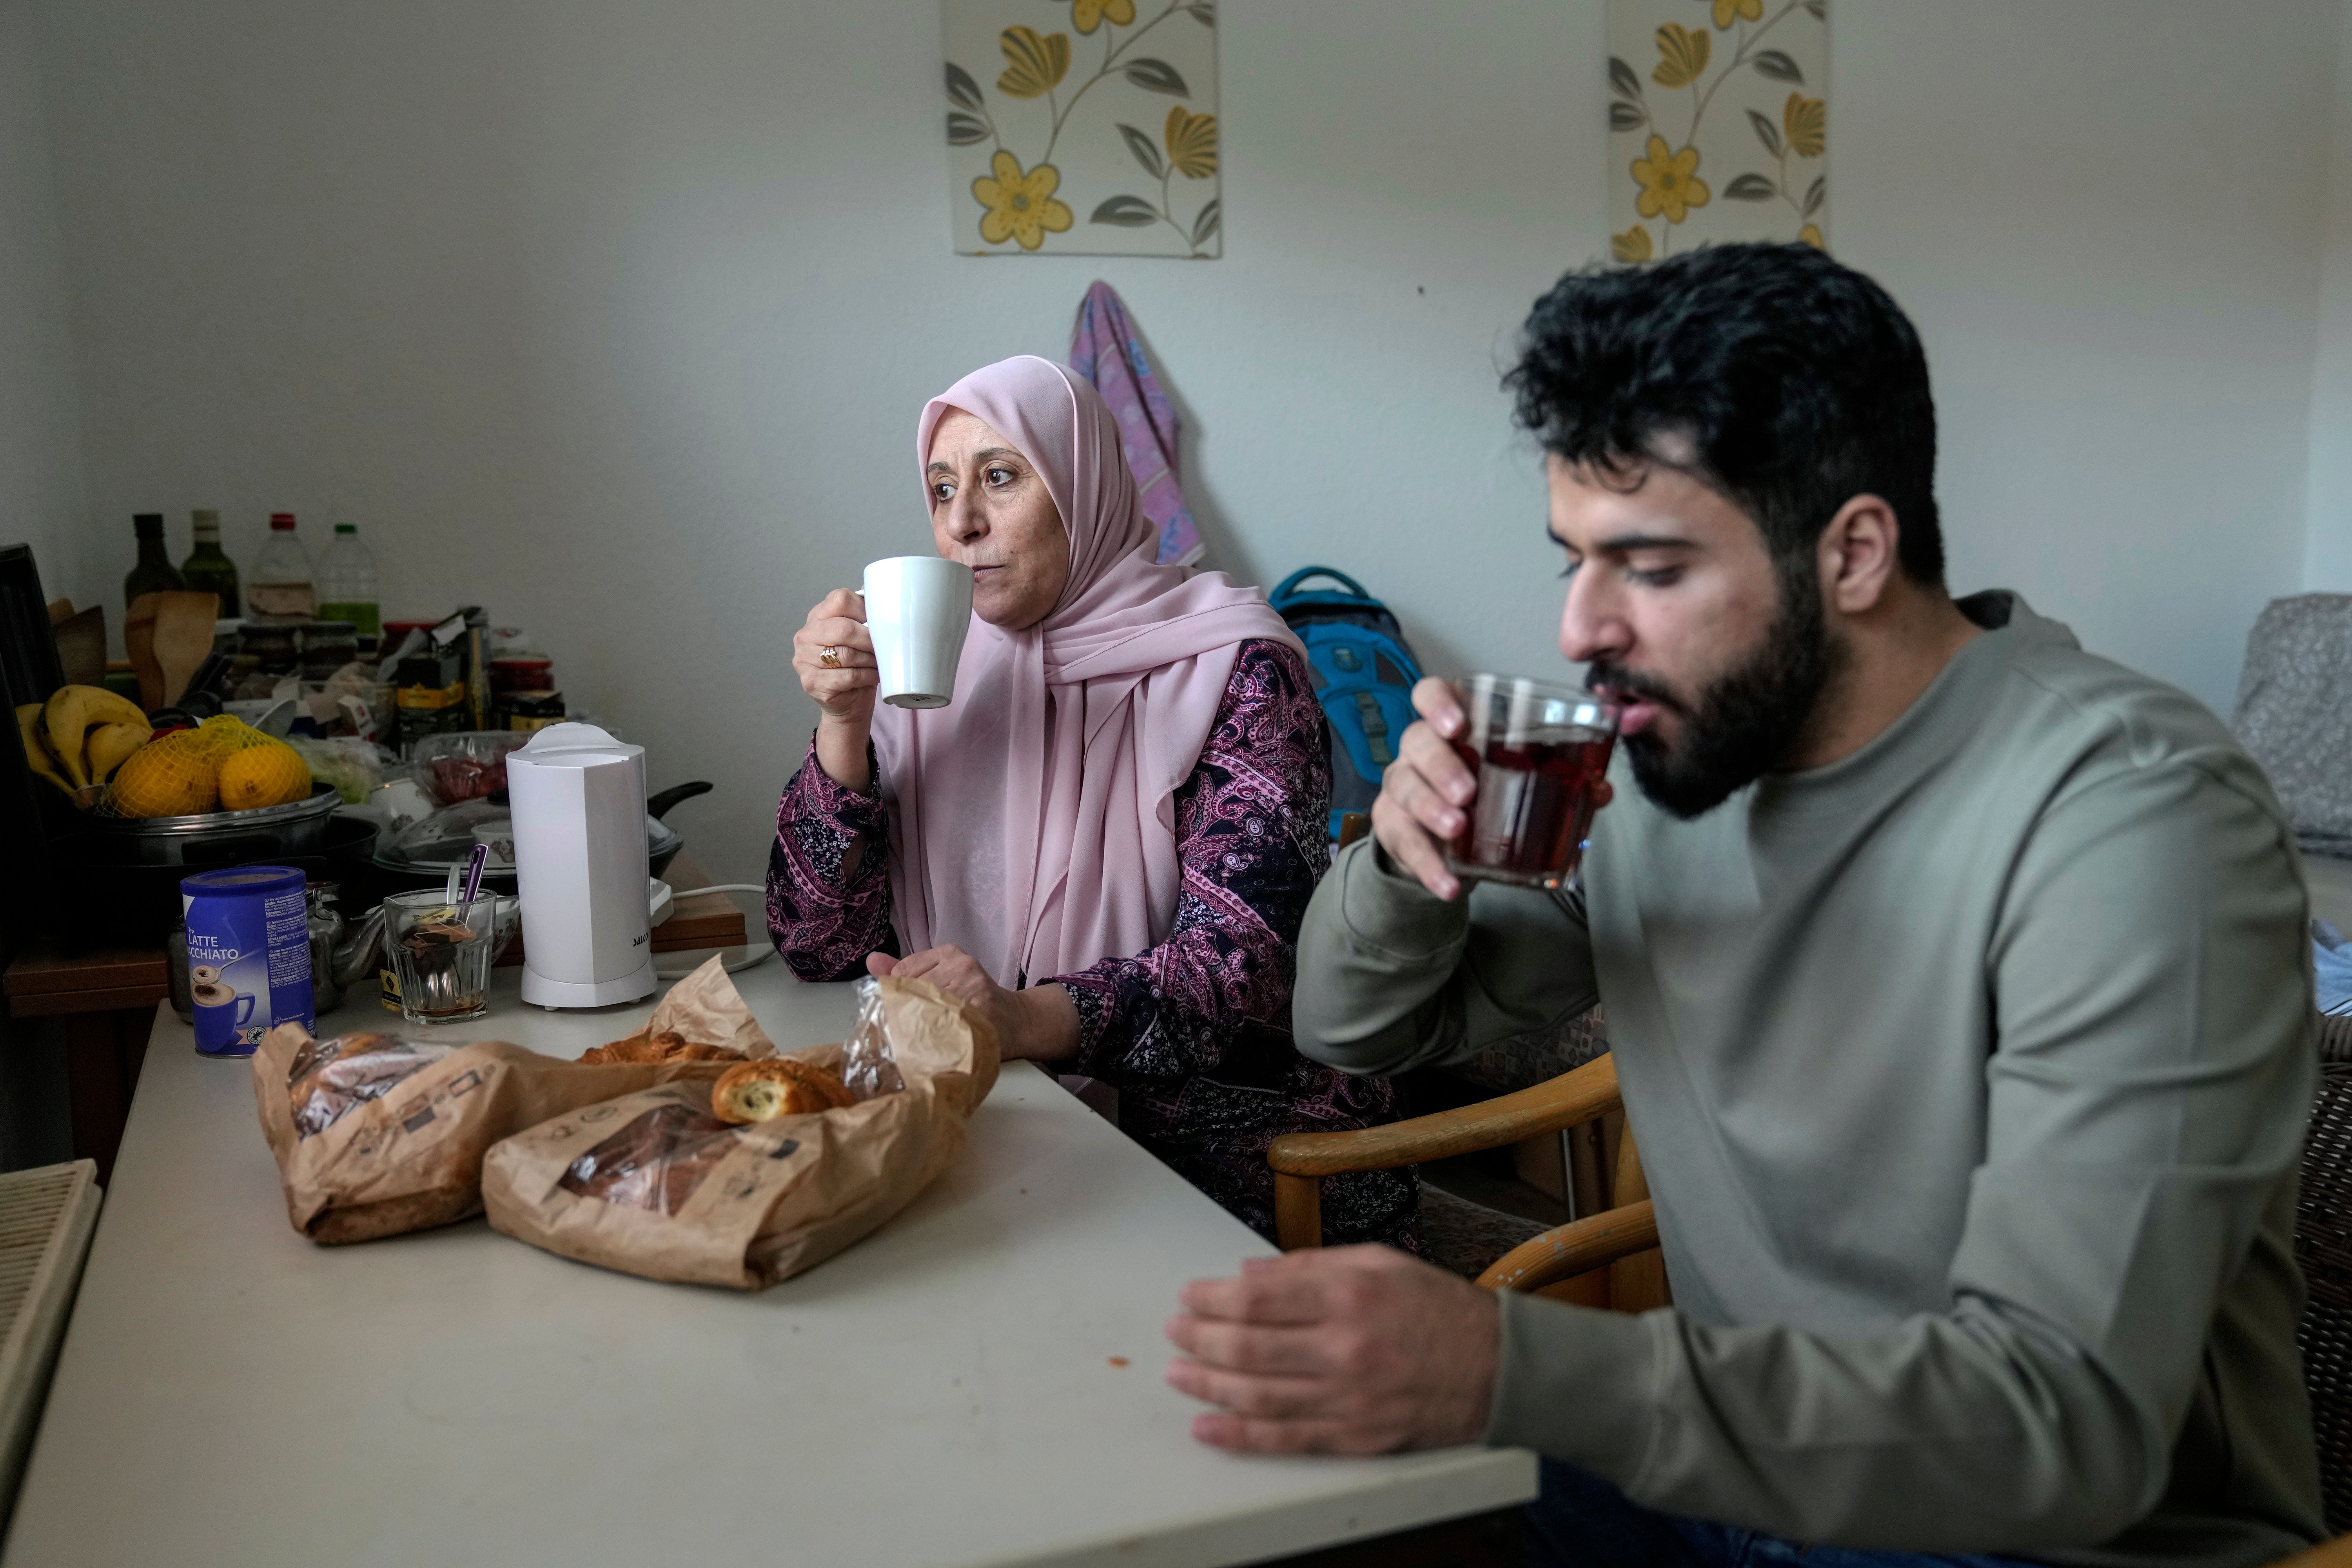 Palestinian asylum seekers Jihad Ammuri 20-year-old and his mother amileh Saqer 68-year-old, drink tea in a refugee shelter in Germany